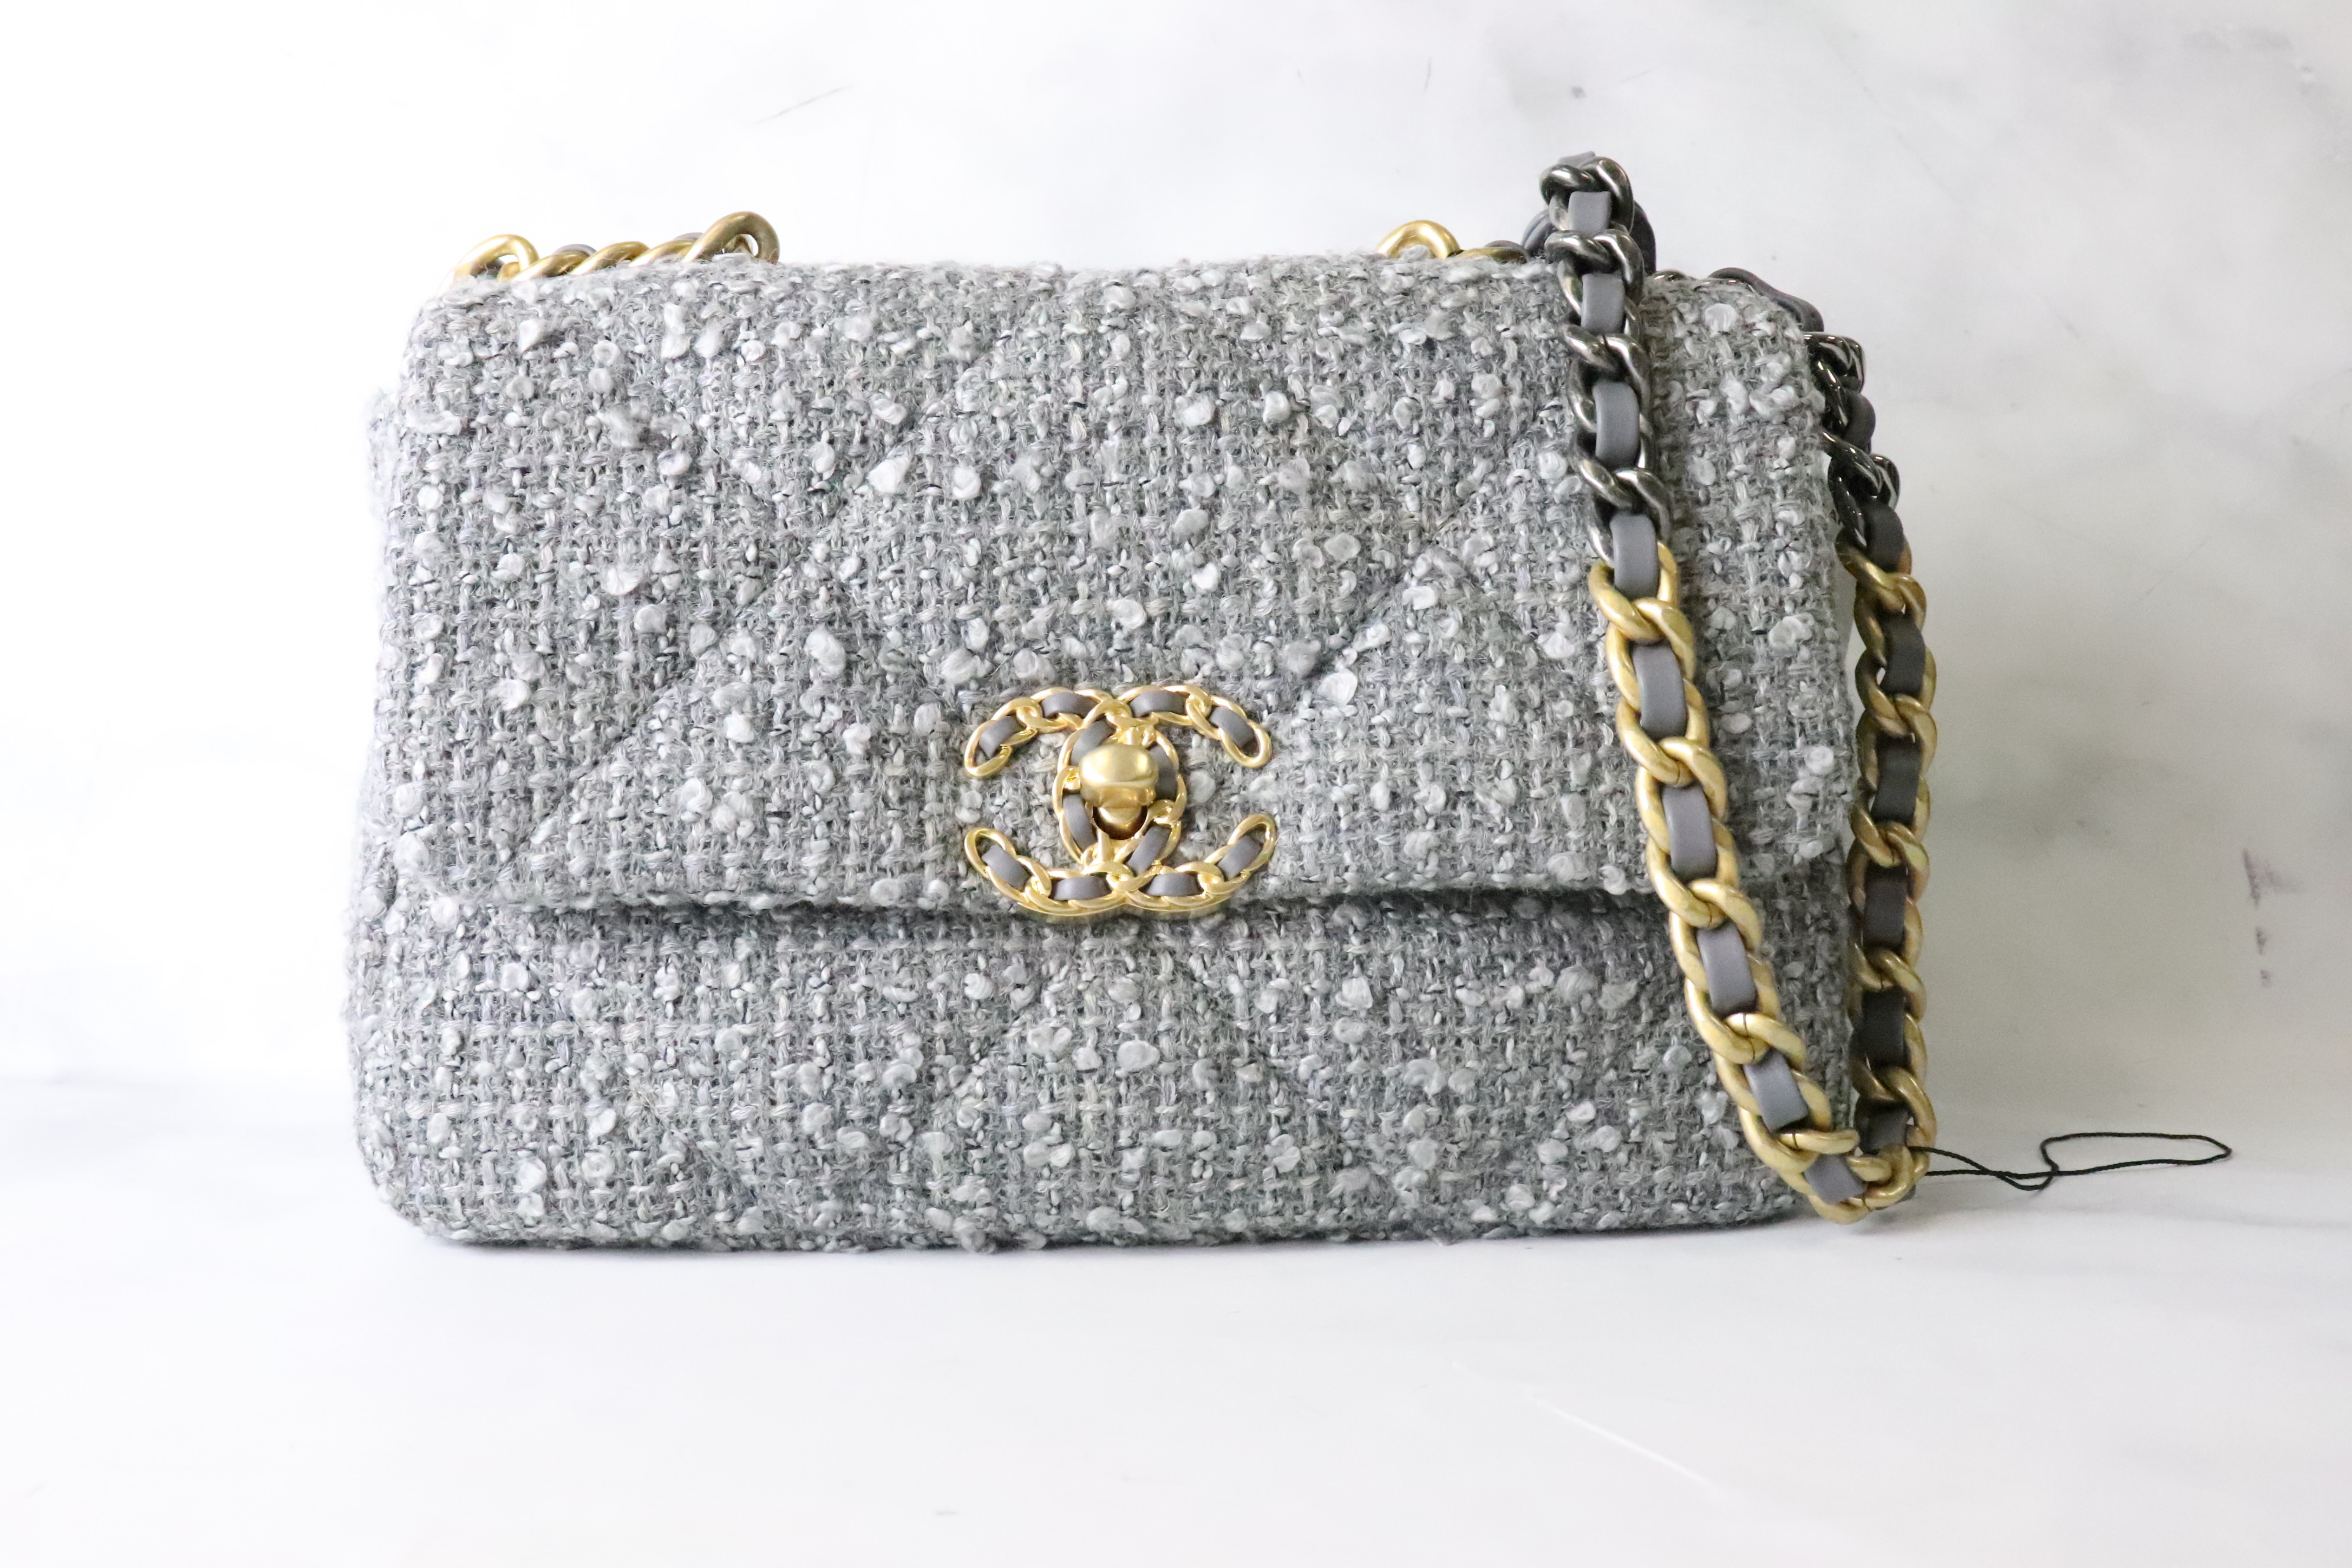 Chanel 19 Small, Black and White Tweed with Mixed Tone Hardware, Preowned  in Dustbag WA001 - Julia Rose Boston